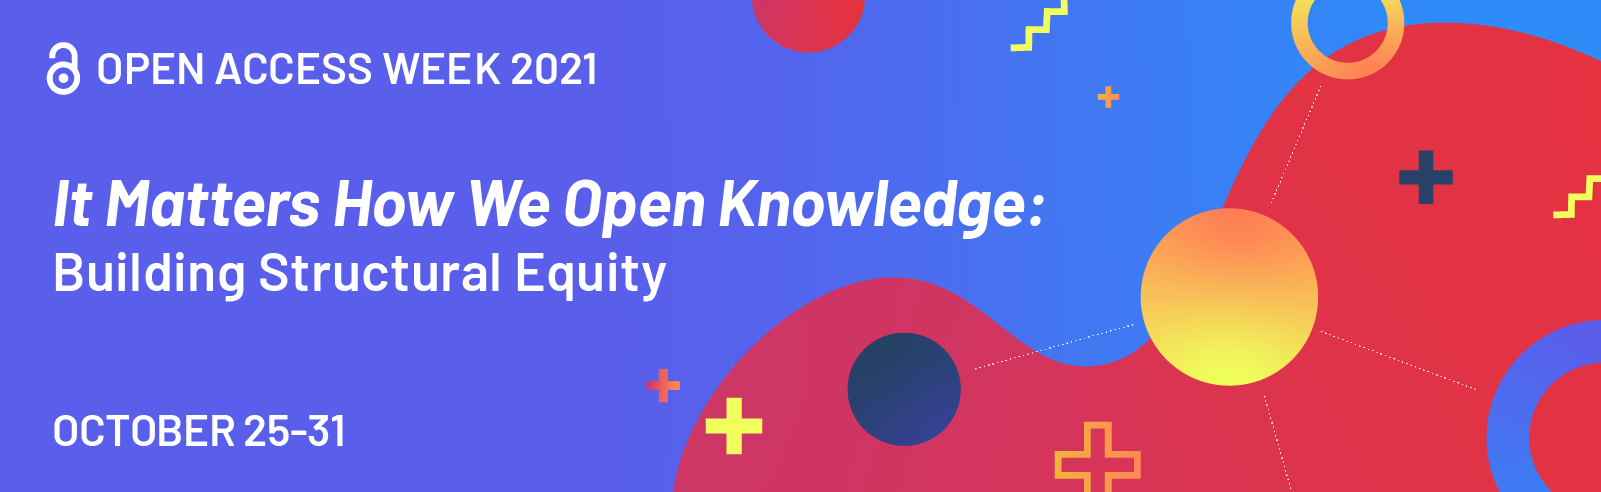 Open Access Week 2021: It matters how we open knowledge: Building structural equity. October 25-31.